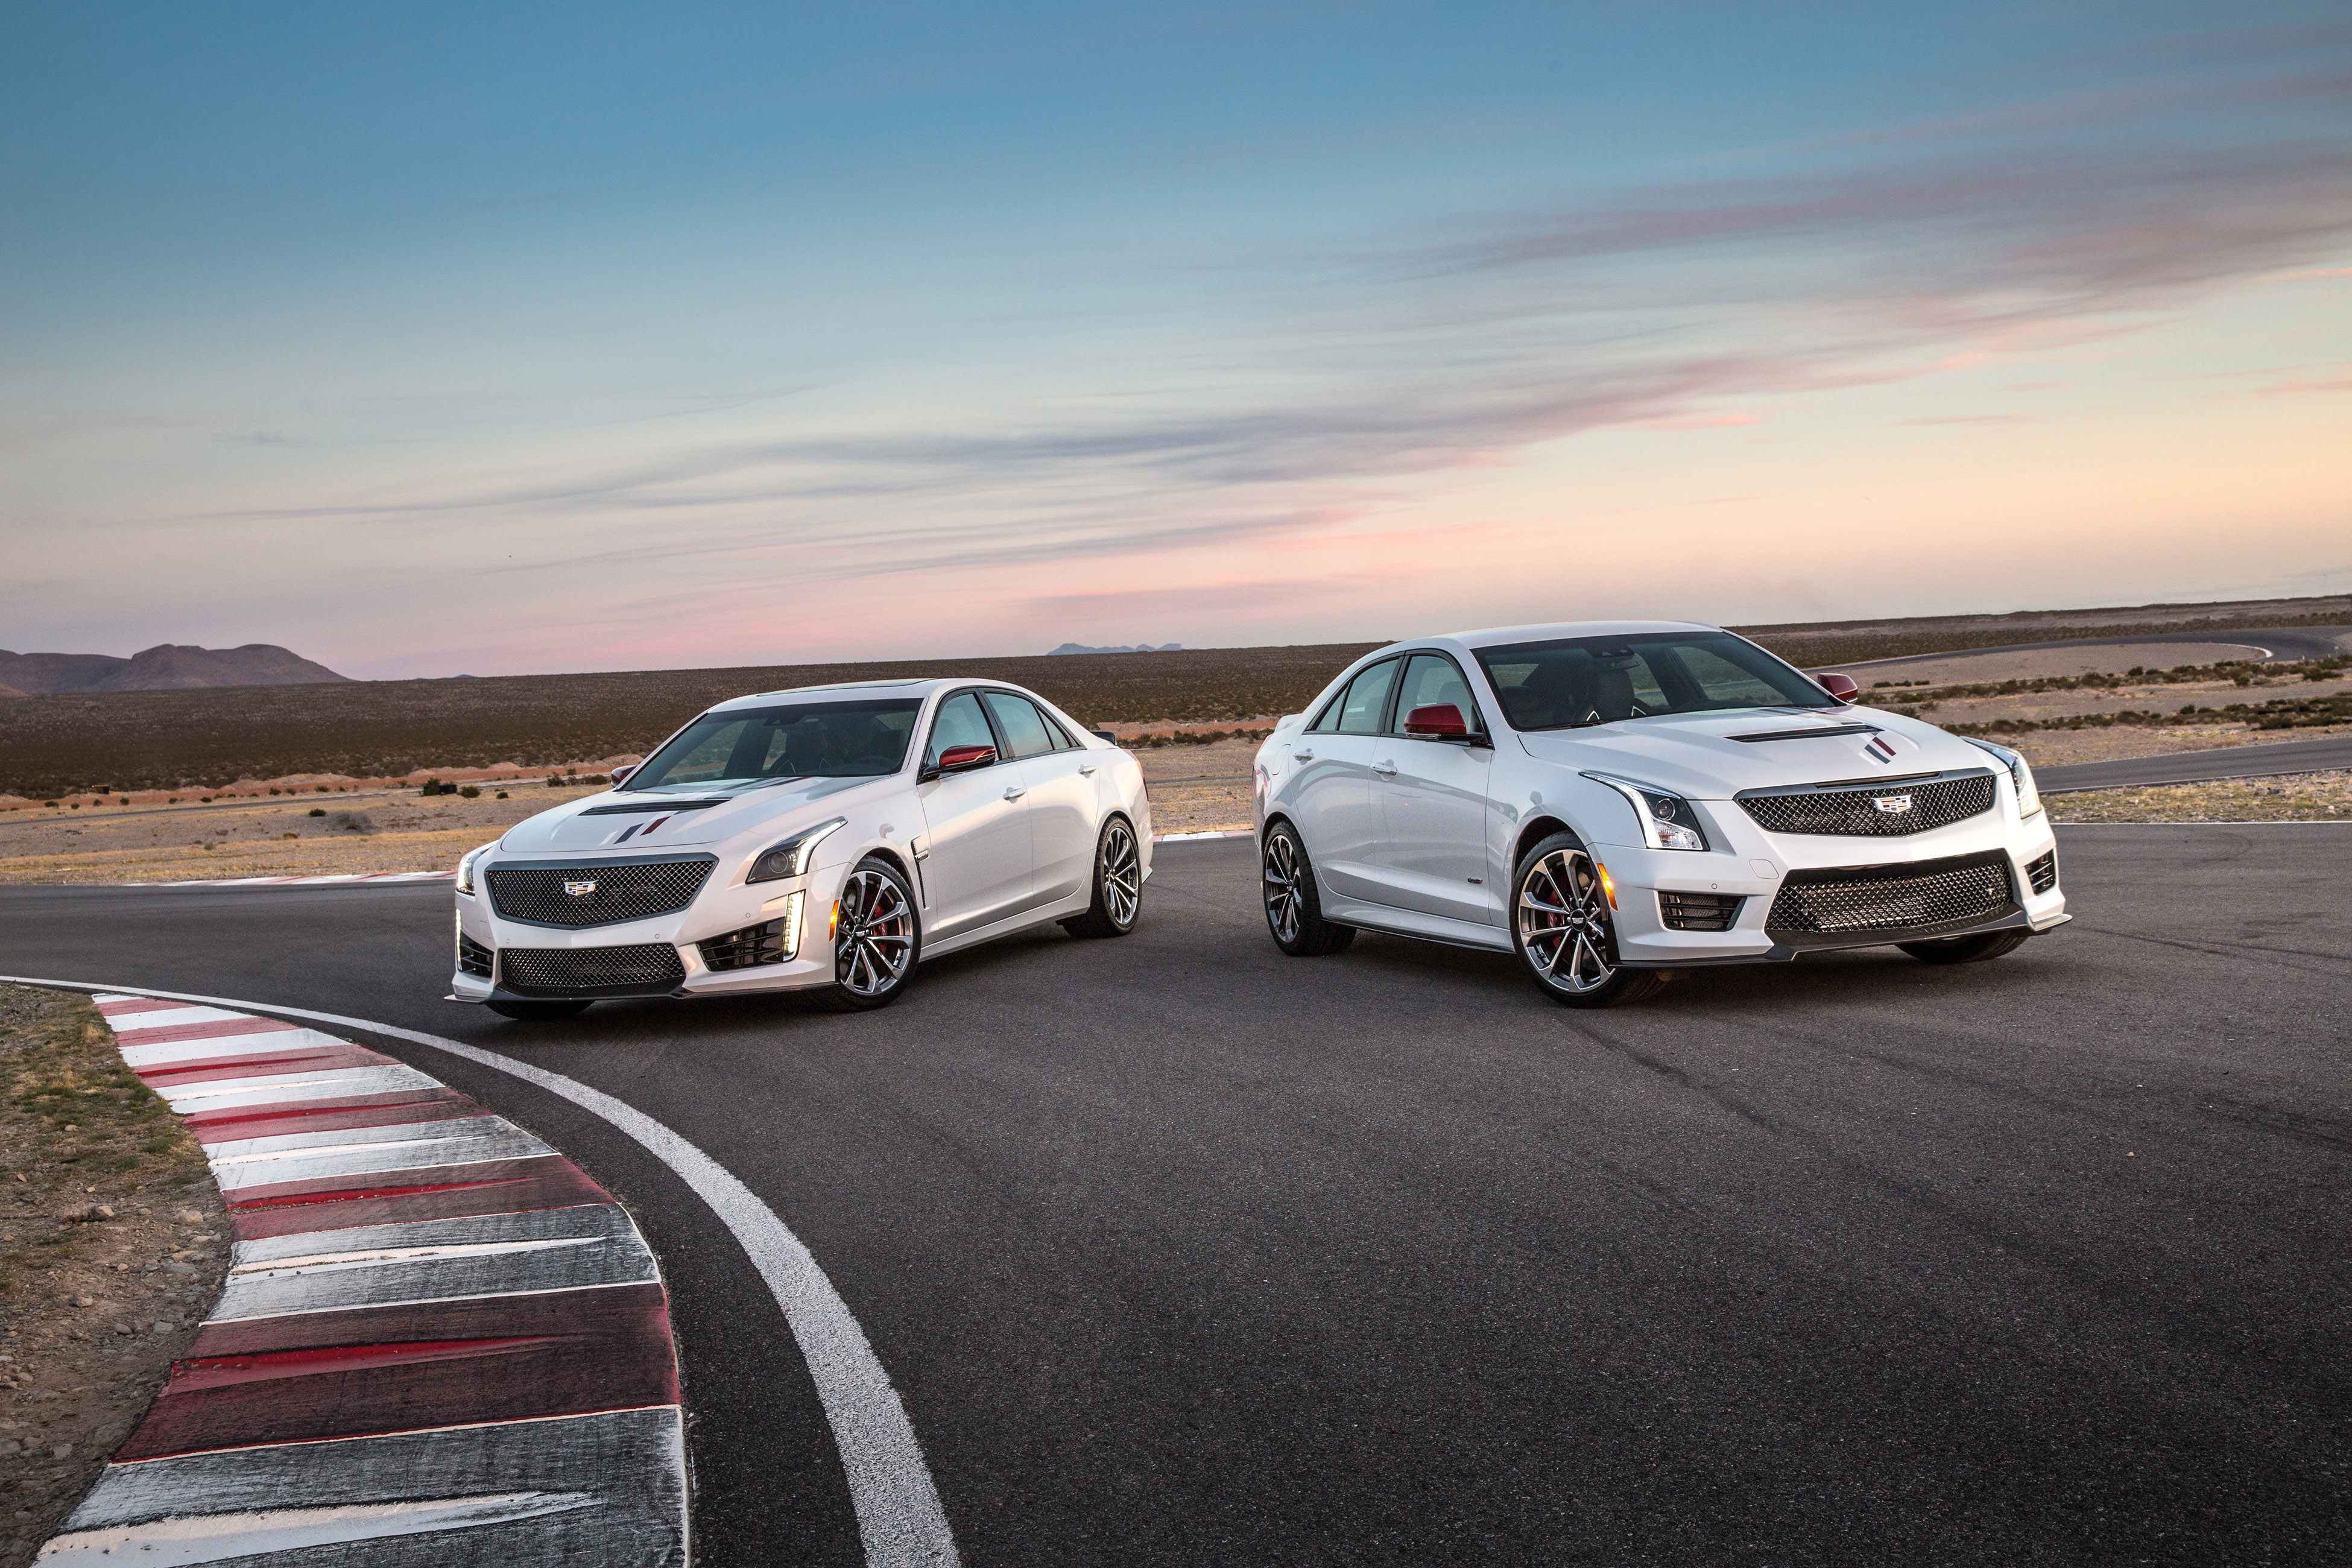 Cadillac Introduces Exclusive V-Series Championship Editions